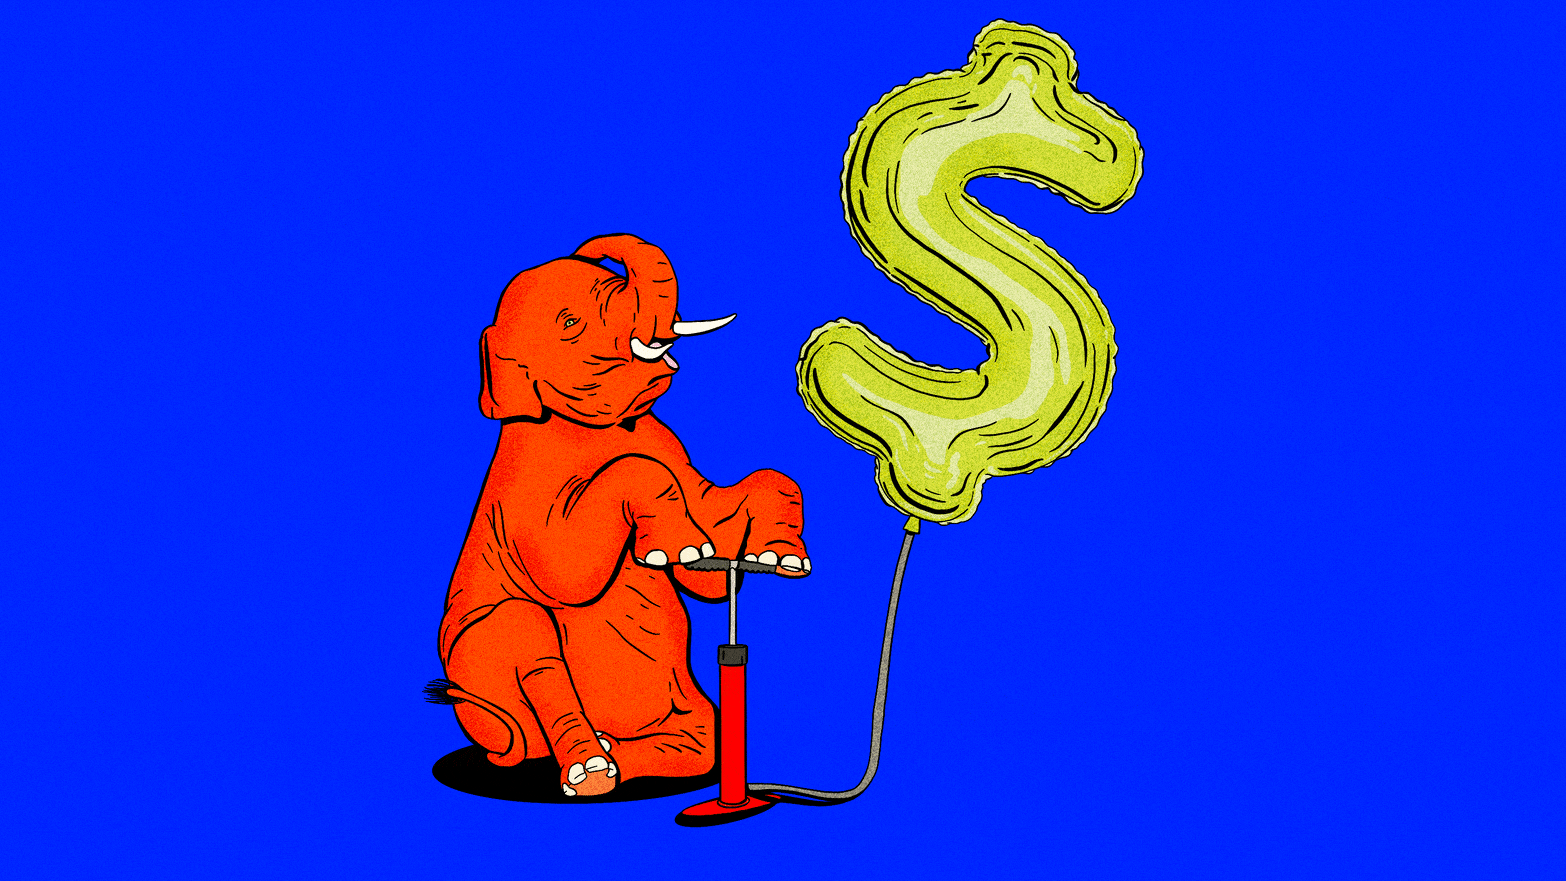 Illustration of a red elephant inflating a mylar green dollar sign balloon.